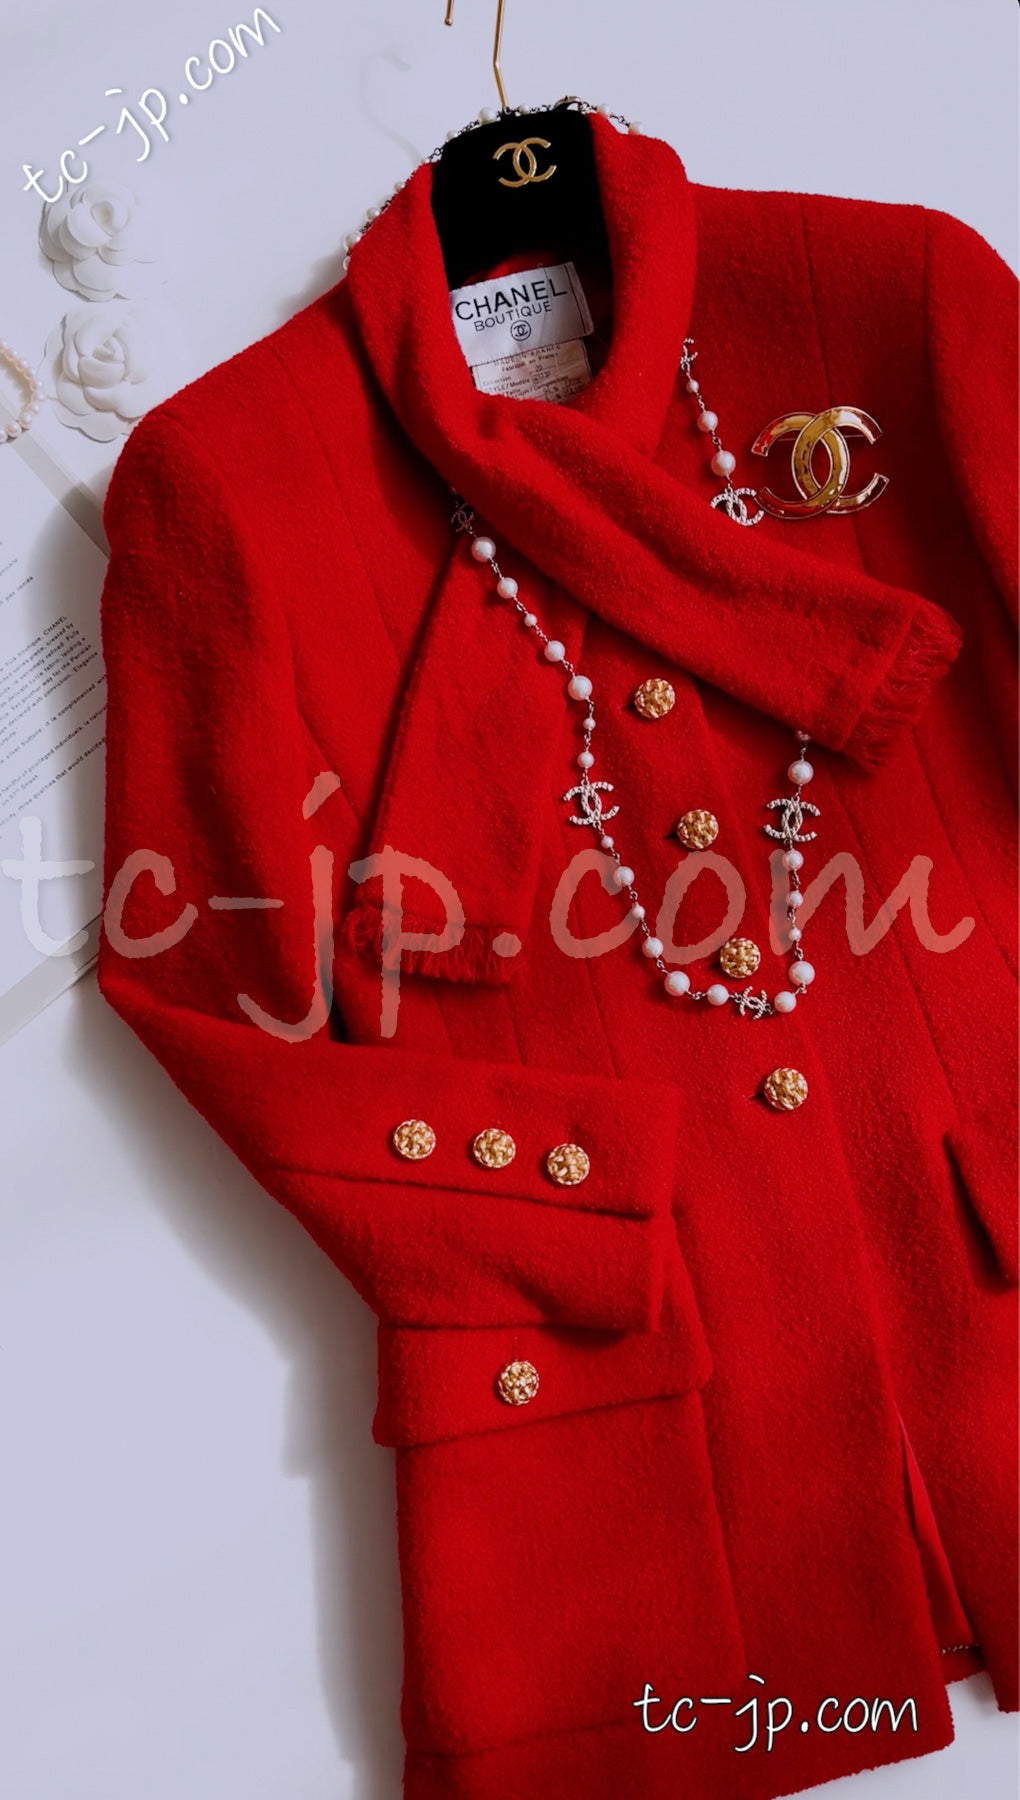 CHANEL 92A Iconic Collector's Piece Purple or Red Jacket 36 38 シャネル パープル・レッド・コレクター限定品 レア・ジャケット 即発